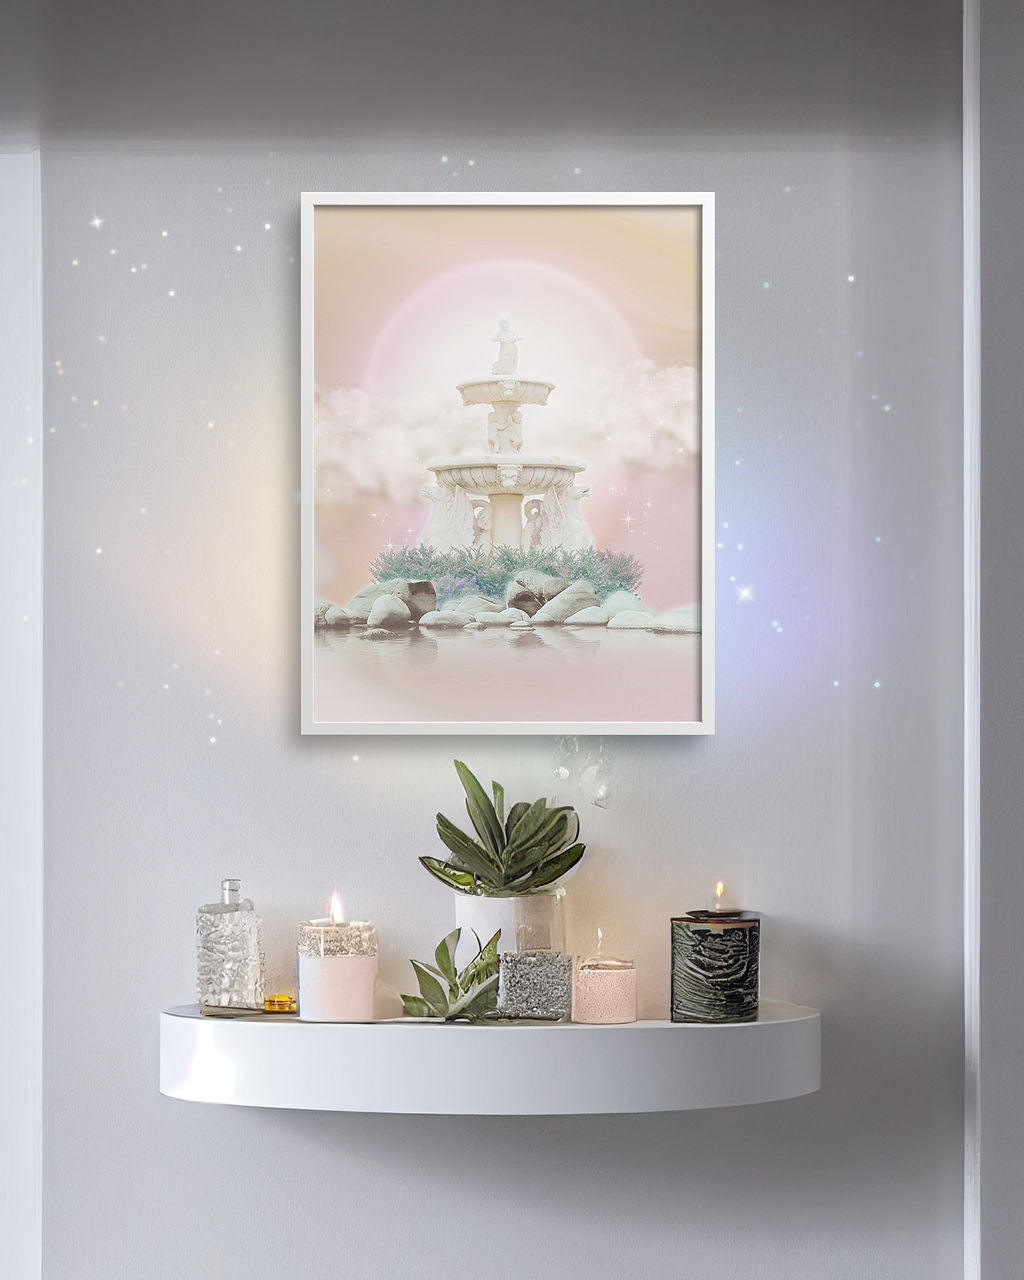 Fountain of Wealth  Open yourself up to the infinite possibilities for money to flow to you in each moment. Hang this fine art print in any space where you’d like to create more positivity and consistent wealth.